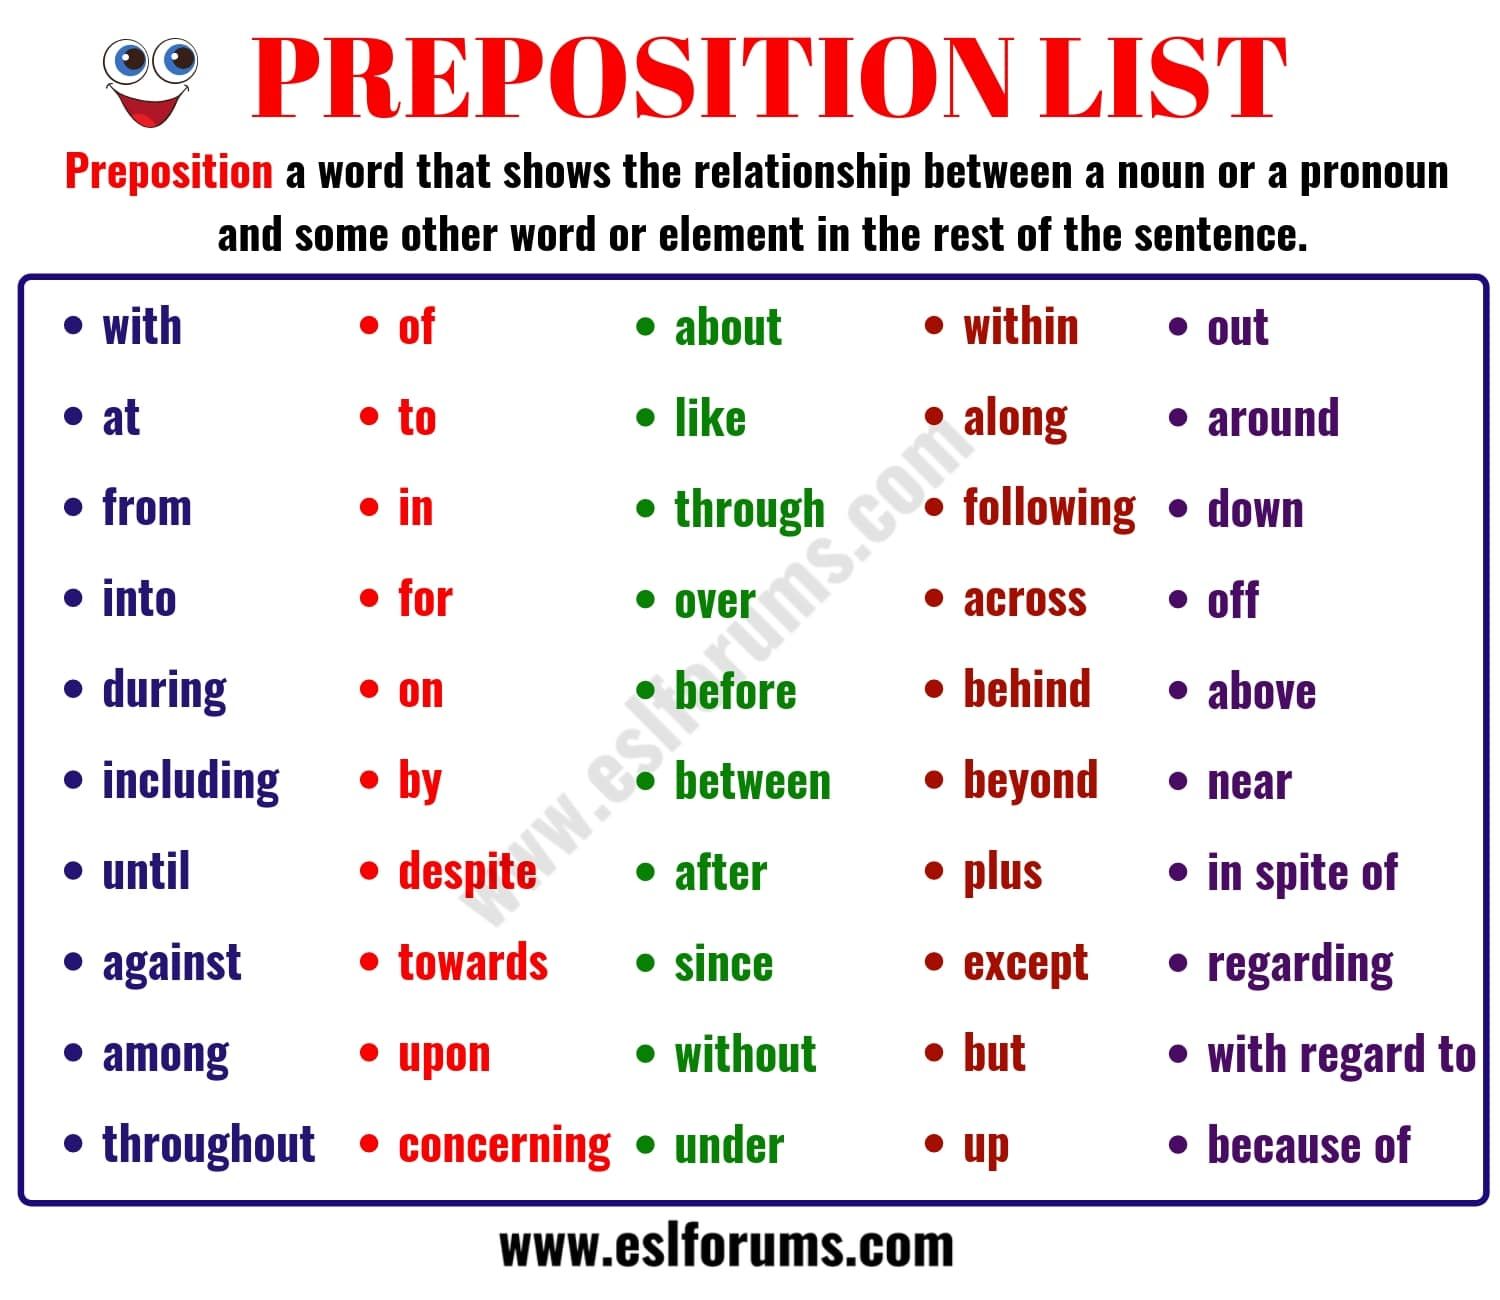 prepositions-what-is-a-preposition-useful-list-examples-beauty-of-the-world